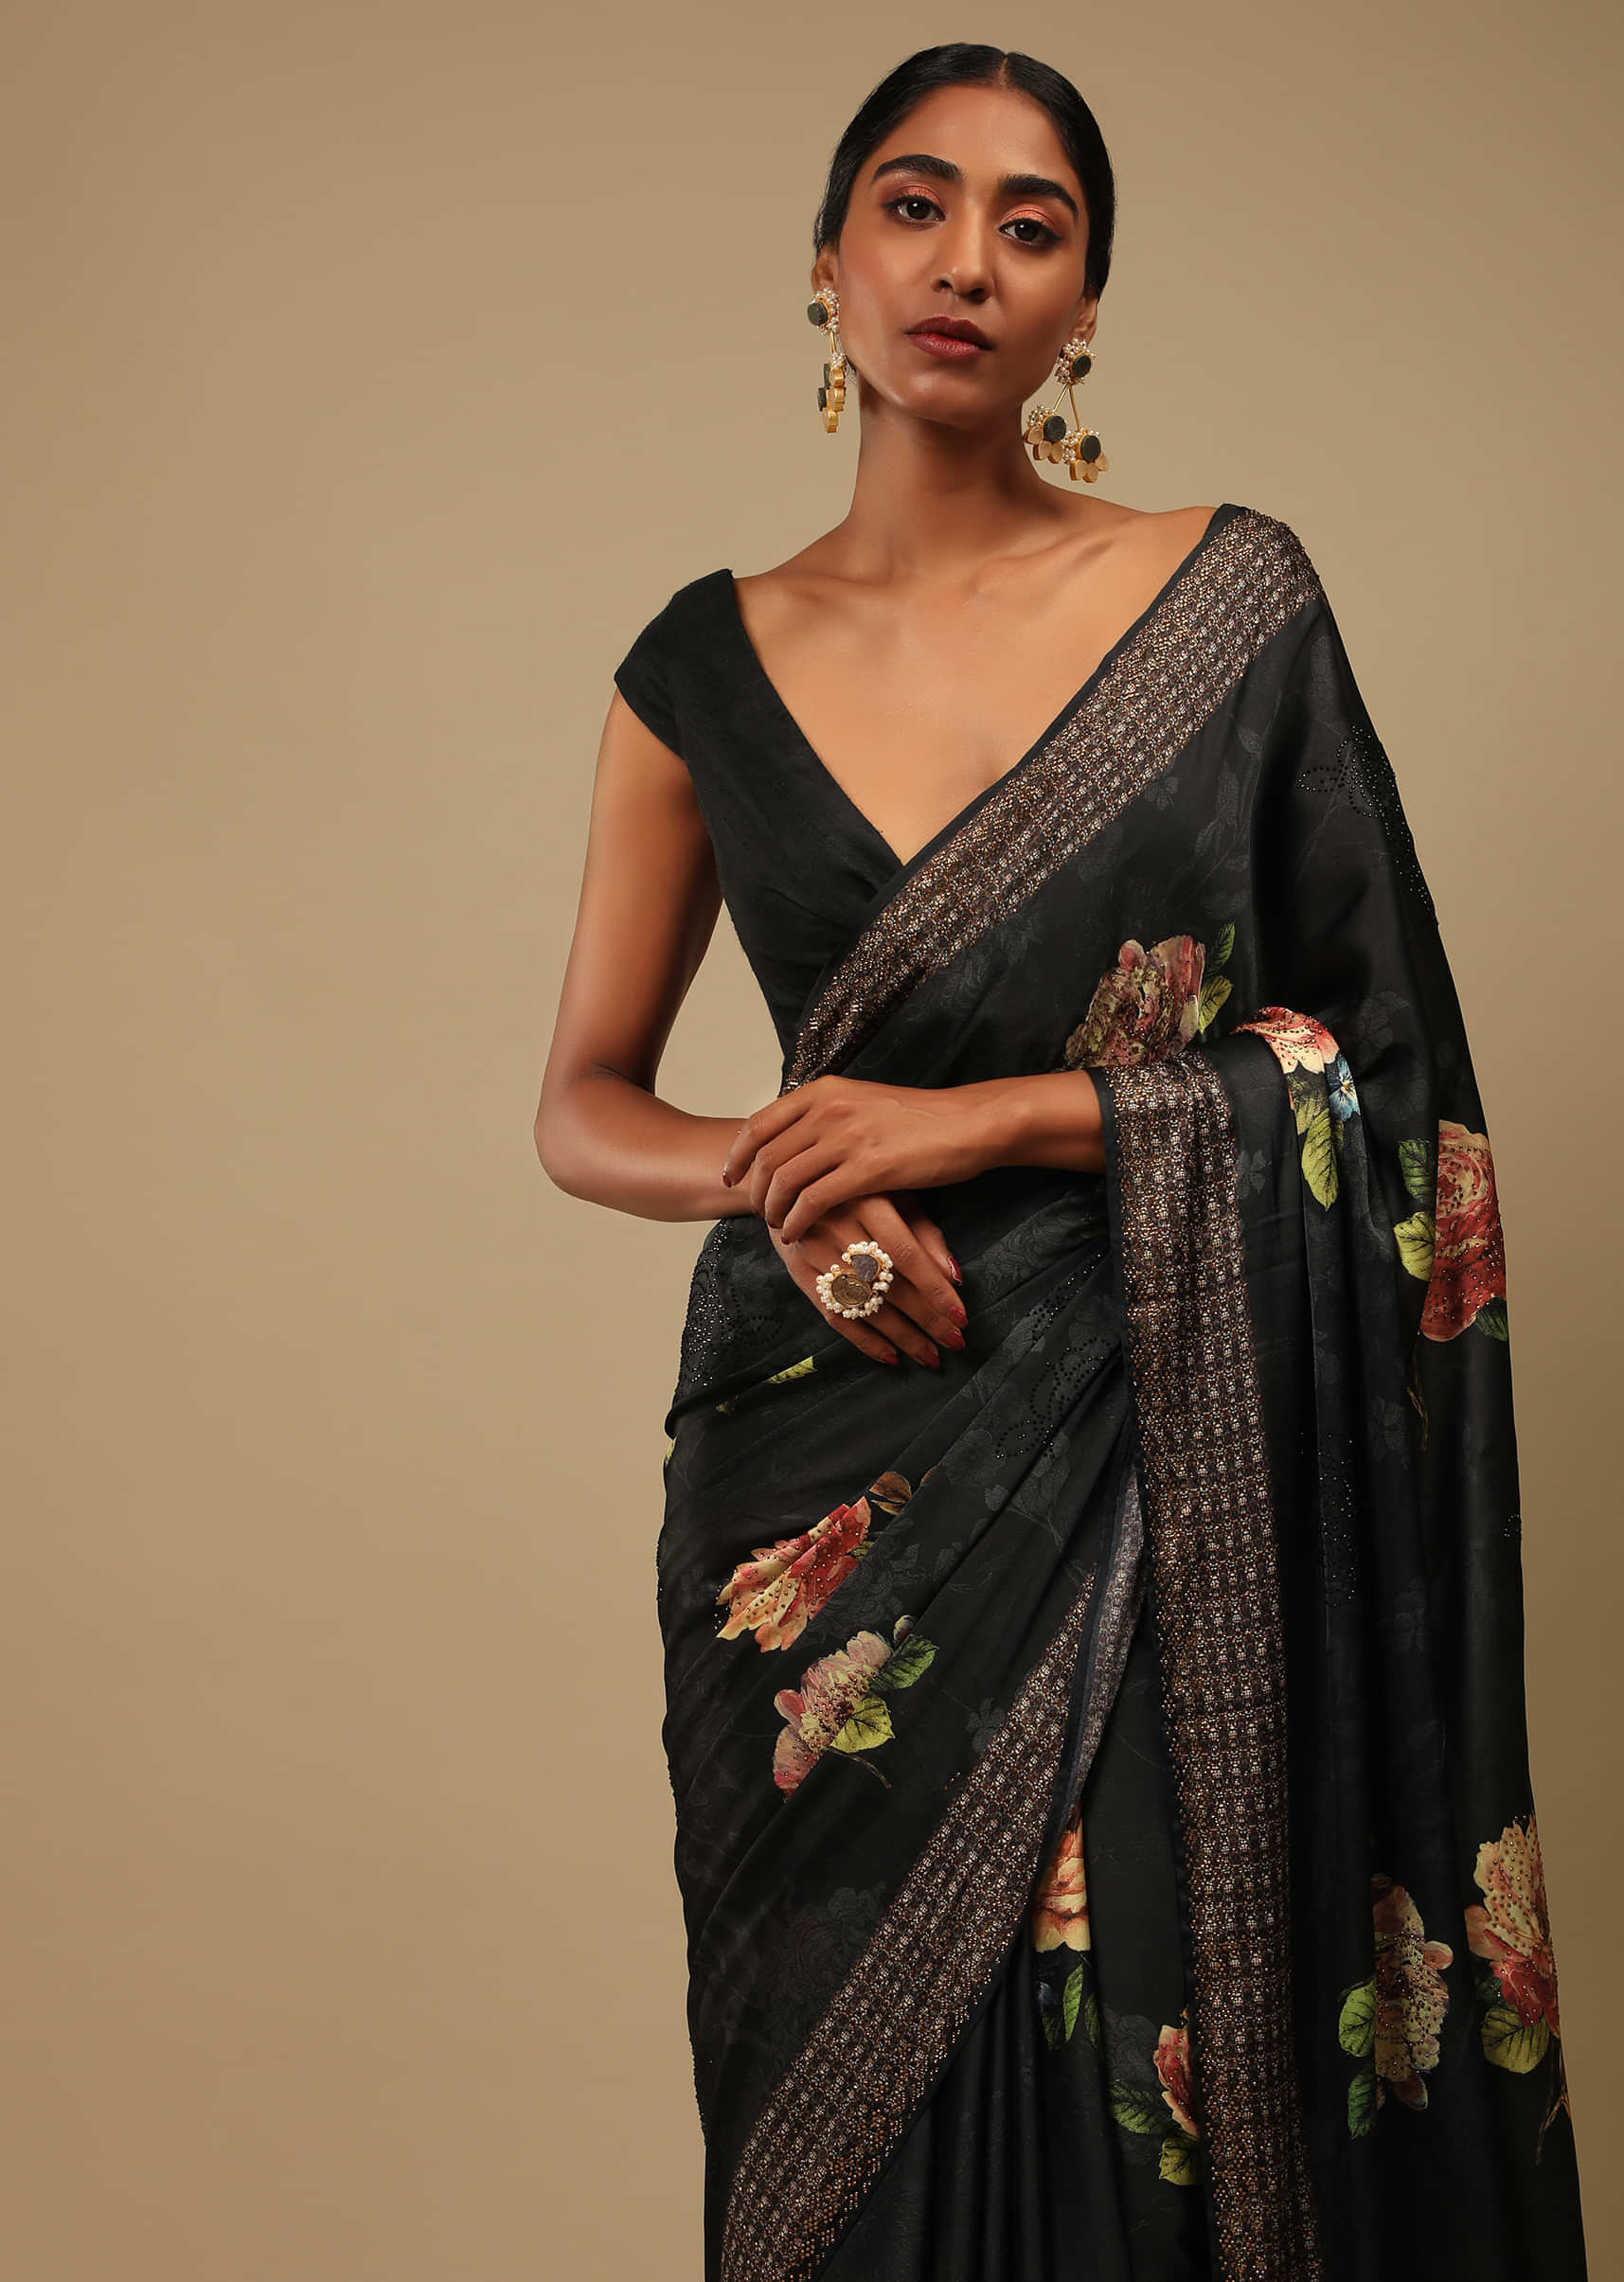 Online Embroidery Courses - Types of Embroidered Saree Borders